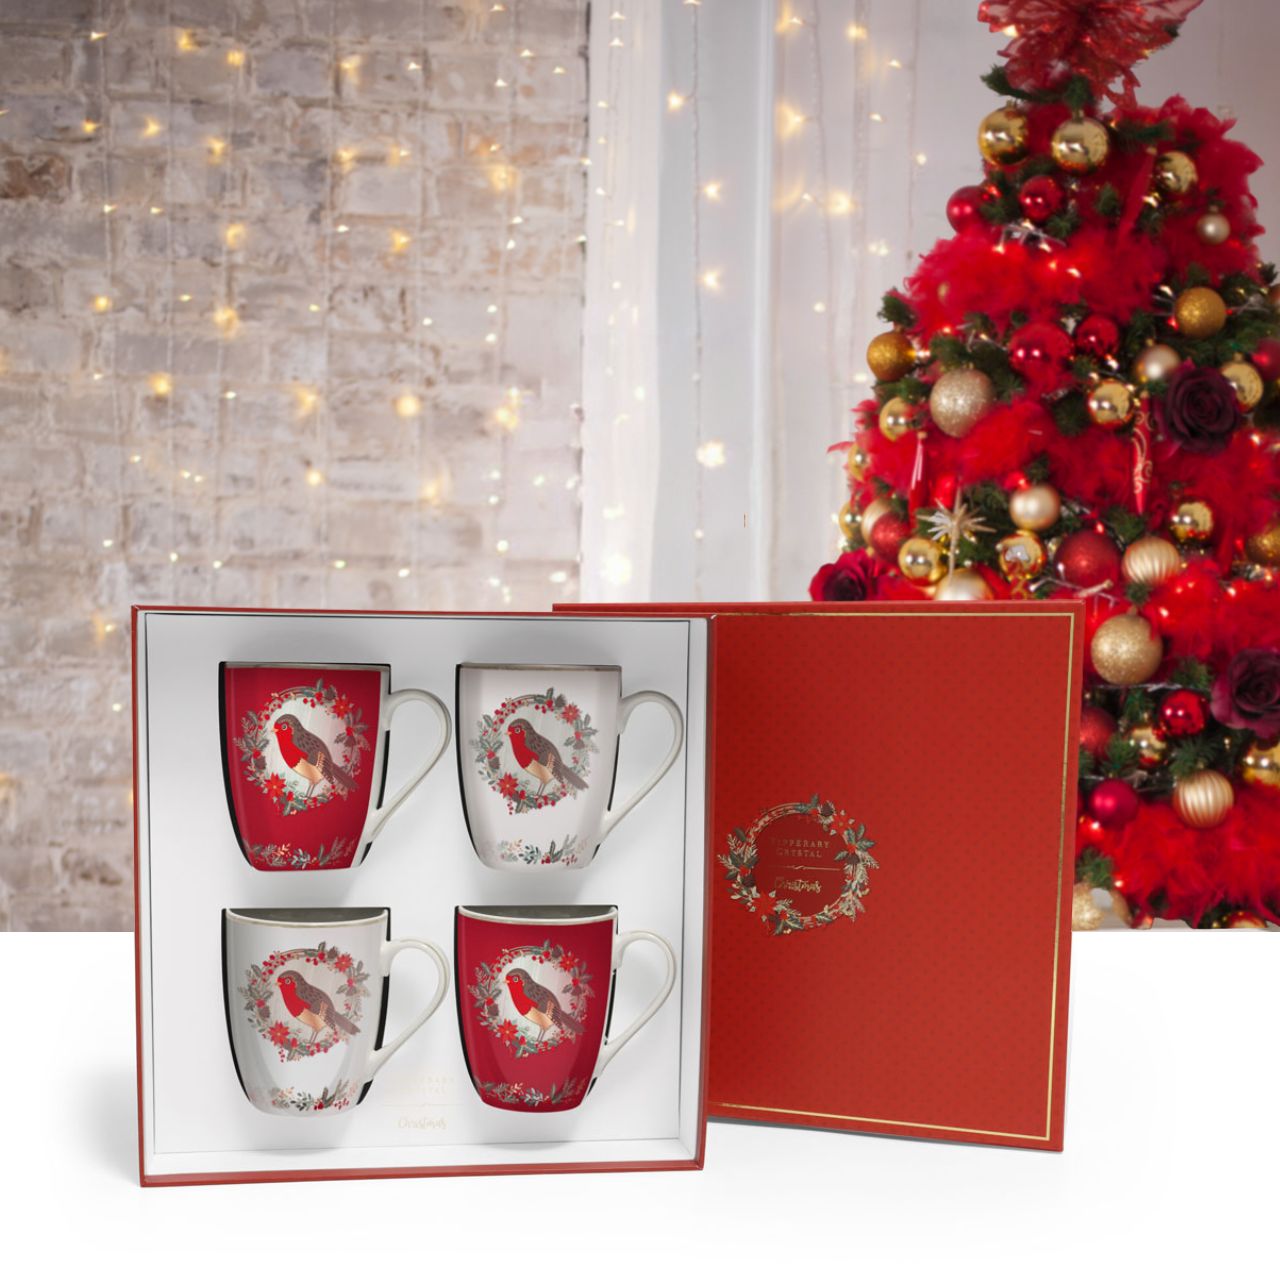 Birdy Set of 4 Christmas Robin Mugs by Tipperary Crystal  Gather your loved ones for a holiday celebration to remember. Our Christmas Tableware is made to bring festive happiness to lunch, dinner and every meal in between. 